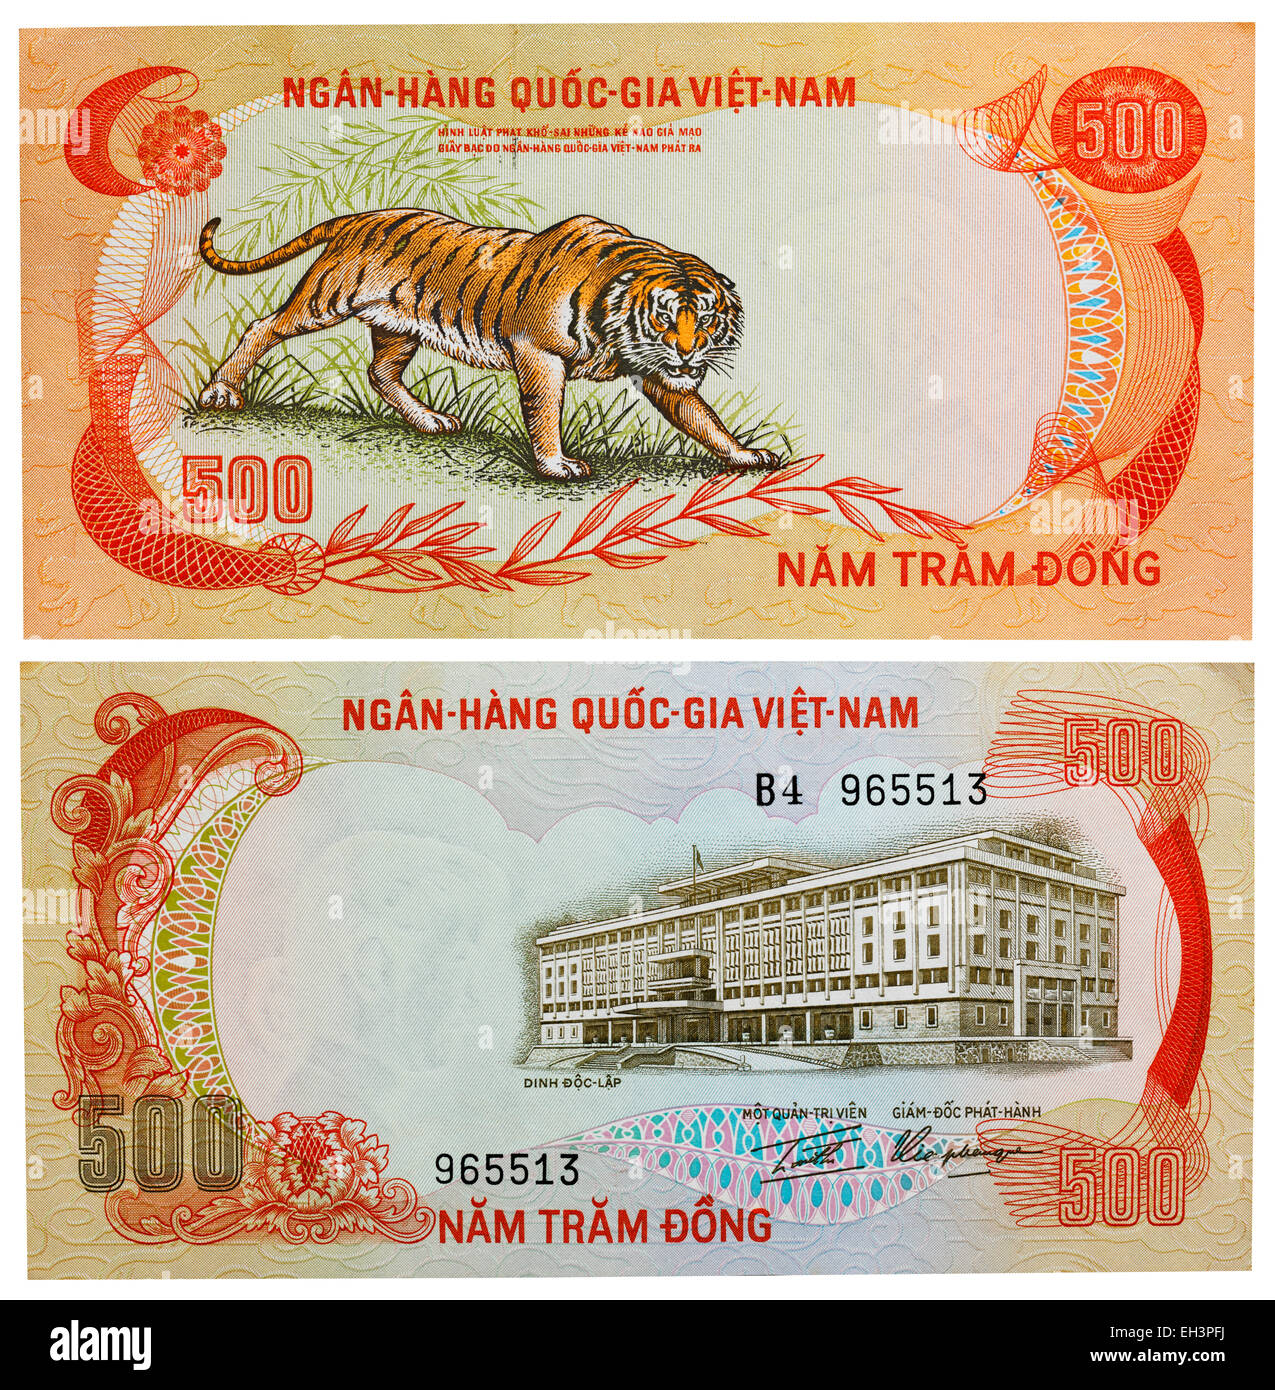 500 dong banknote, Growling tiger,  Palace of Independence, South Vietnam, 1972 Stock Photo